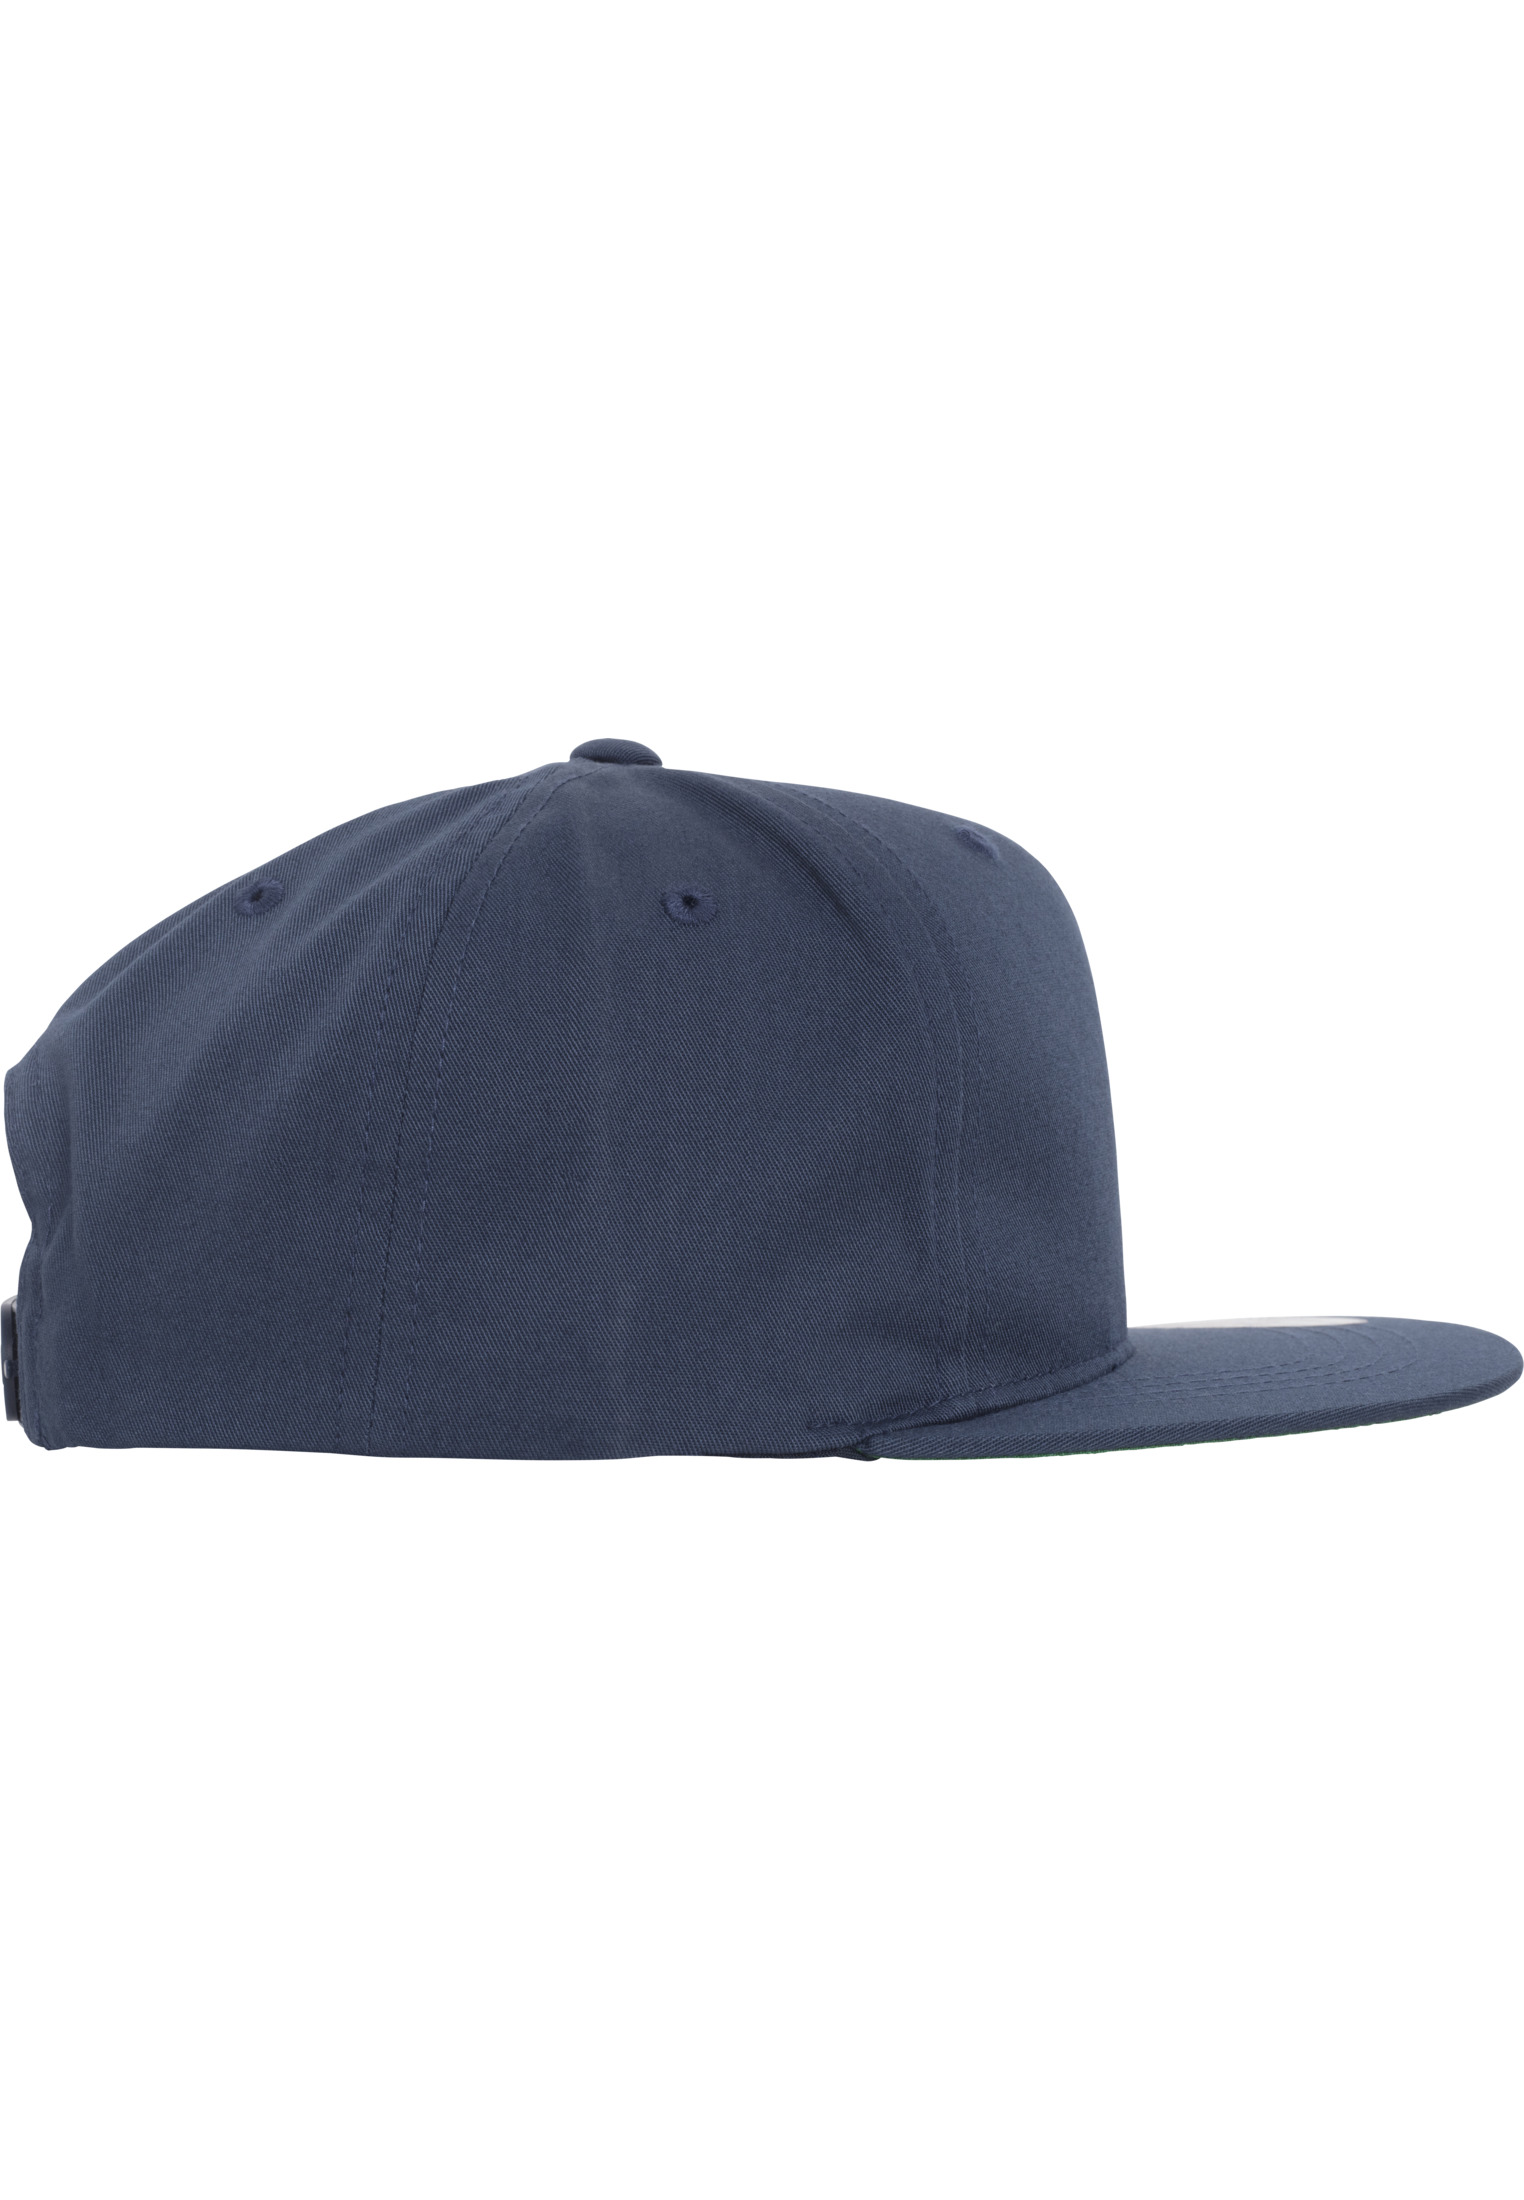 Kids Pro-Style Twill Snapback Youth Cap in Farbe navy